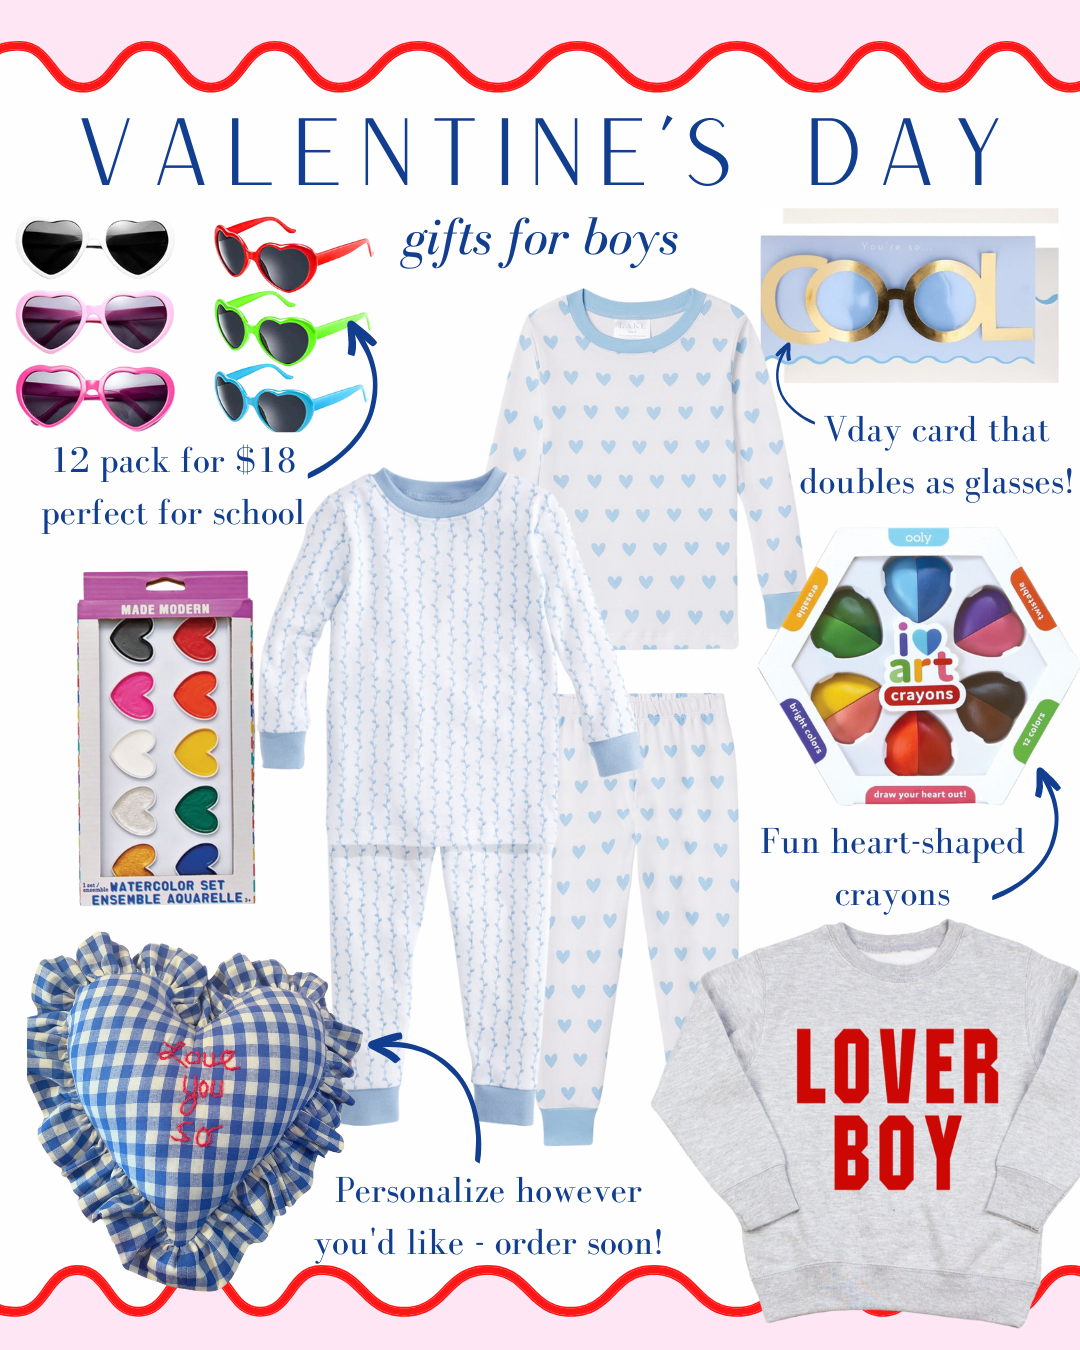 Valentine's Day gifts for sons, Valentine's Day gifts for entire family, Valentine's Day gifts for boys, Valentine's gift ideas for little boys, toddler boy Valentine's Day gifts